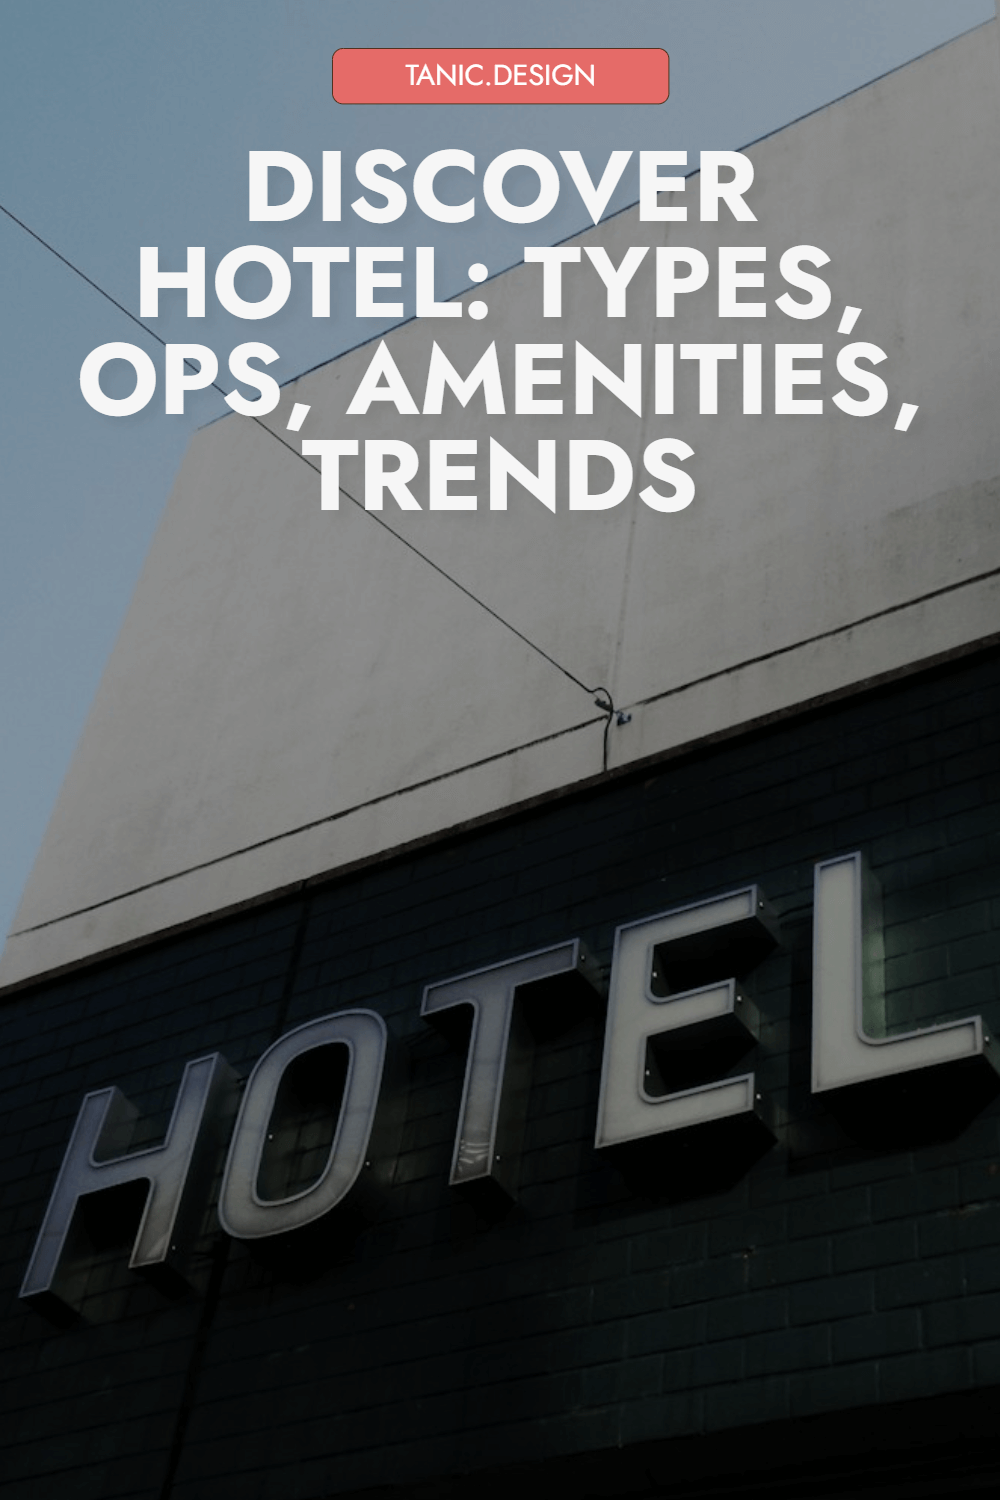 Guide to Hotels: Amenities and Trends